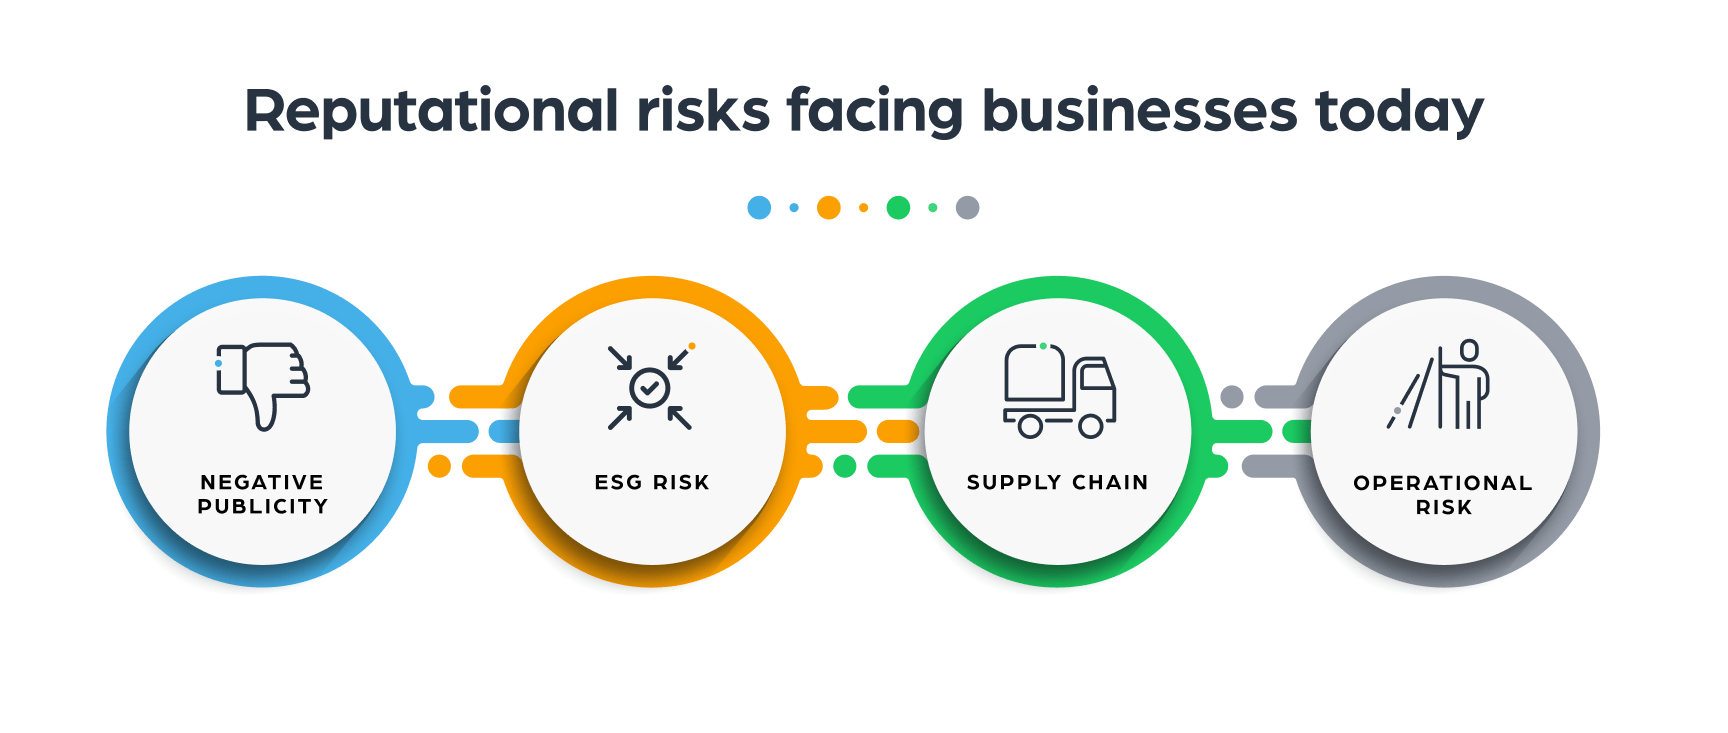 The reputational risks facing businesses today